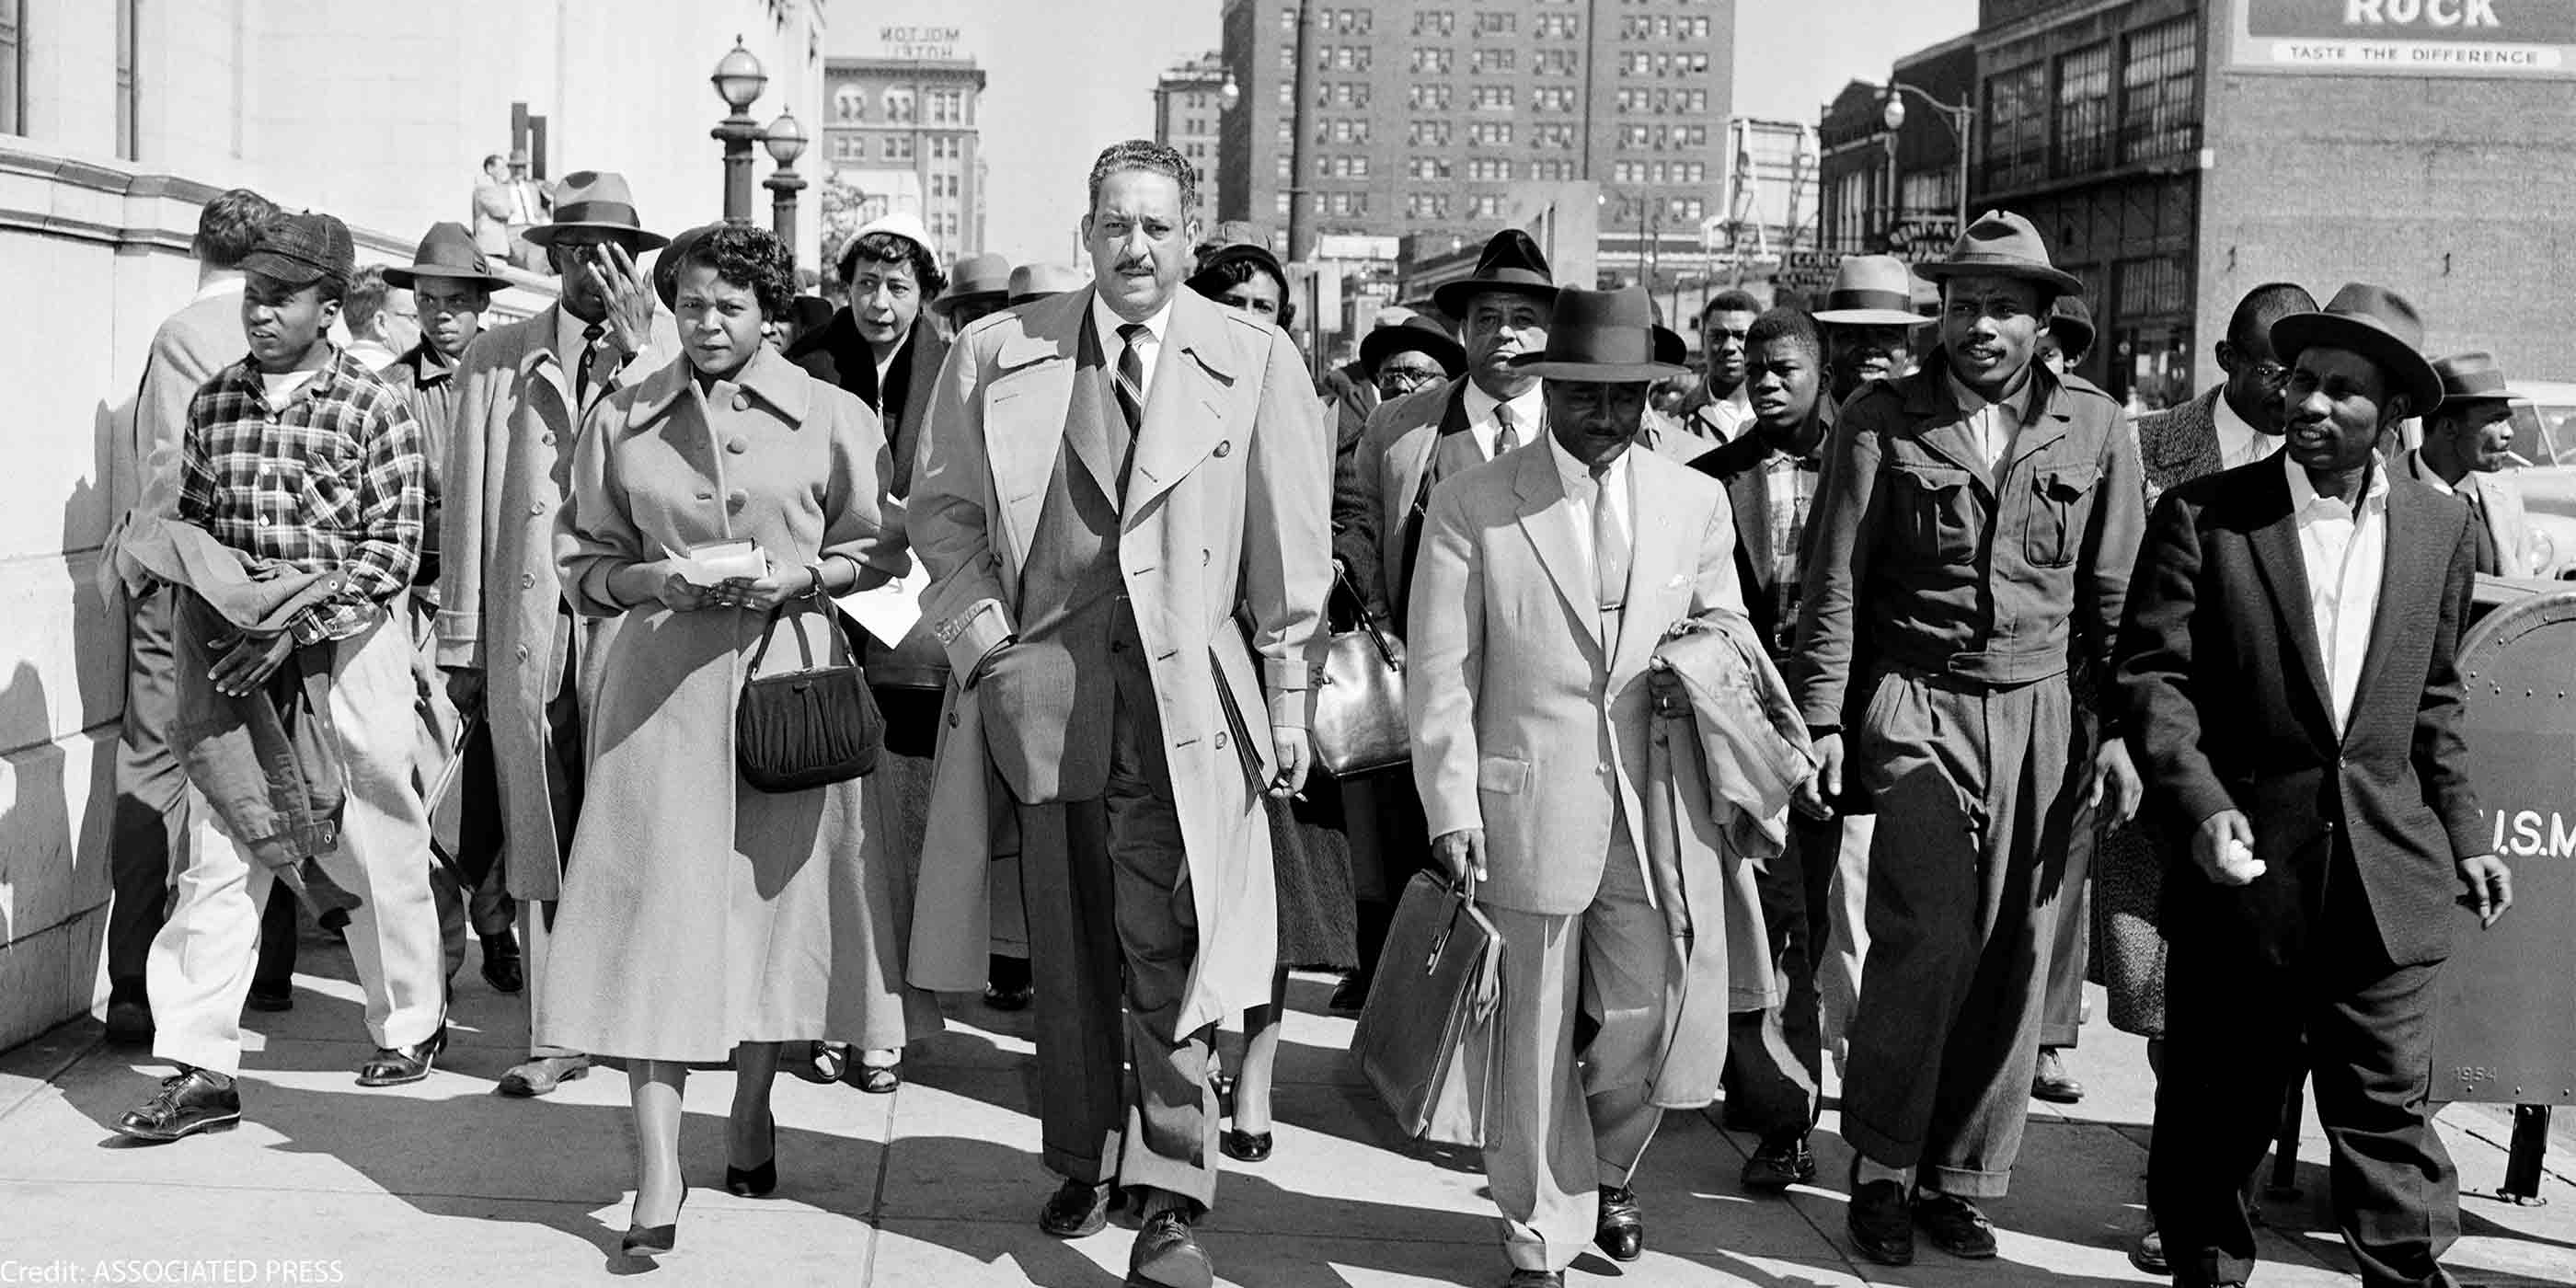 Autherine Lucy, left, front, 26-year-old student at the University of Alabama, arrives at U.S. District Court for the hearing of her petition for an order requiring the school to re-admit her to classes in Birmingham, Ala., Feb. 29, 1956. With Lucy are her legal team, Thurgood Marshall, tall man at center, and Arthur Shores, carrying coat at right.